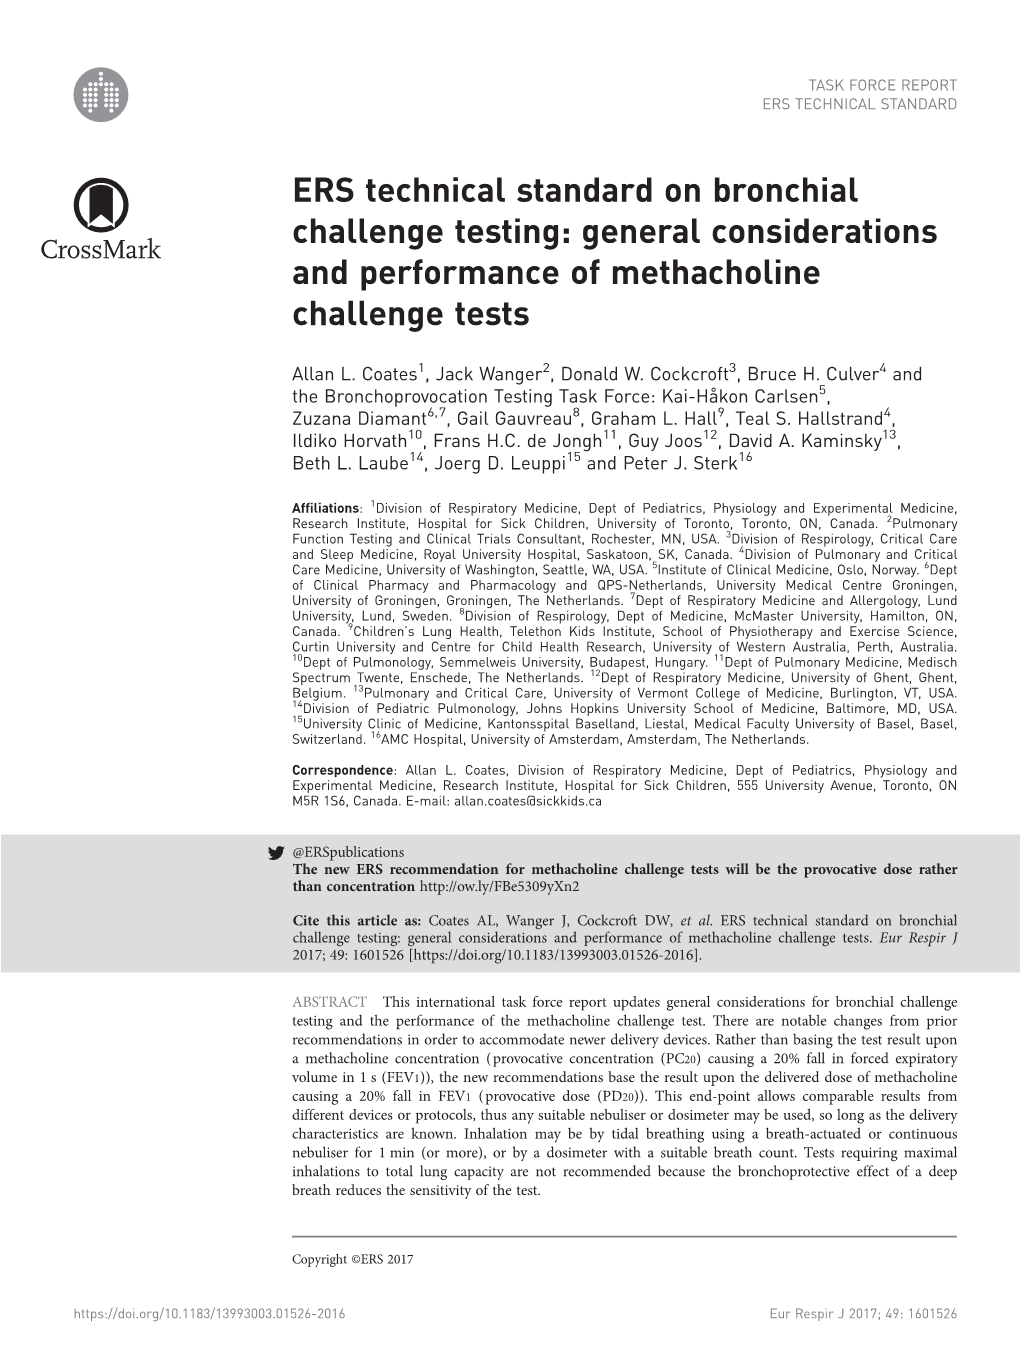 General Considerations and Performance of Methacholine Challenge Tests